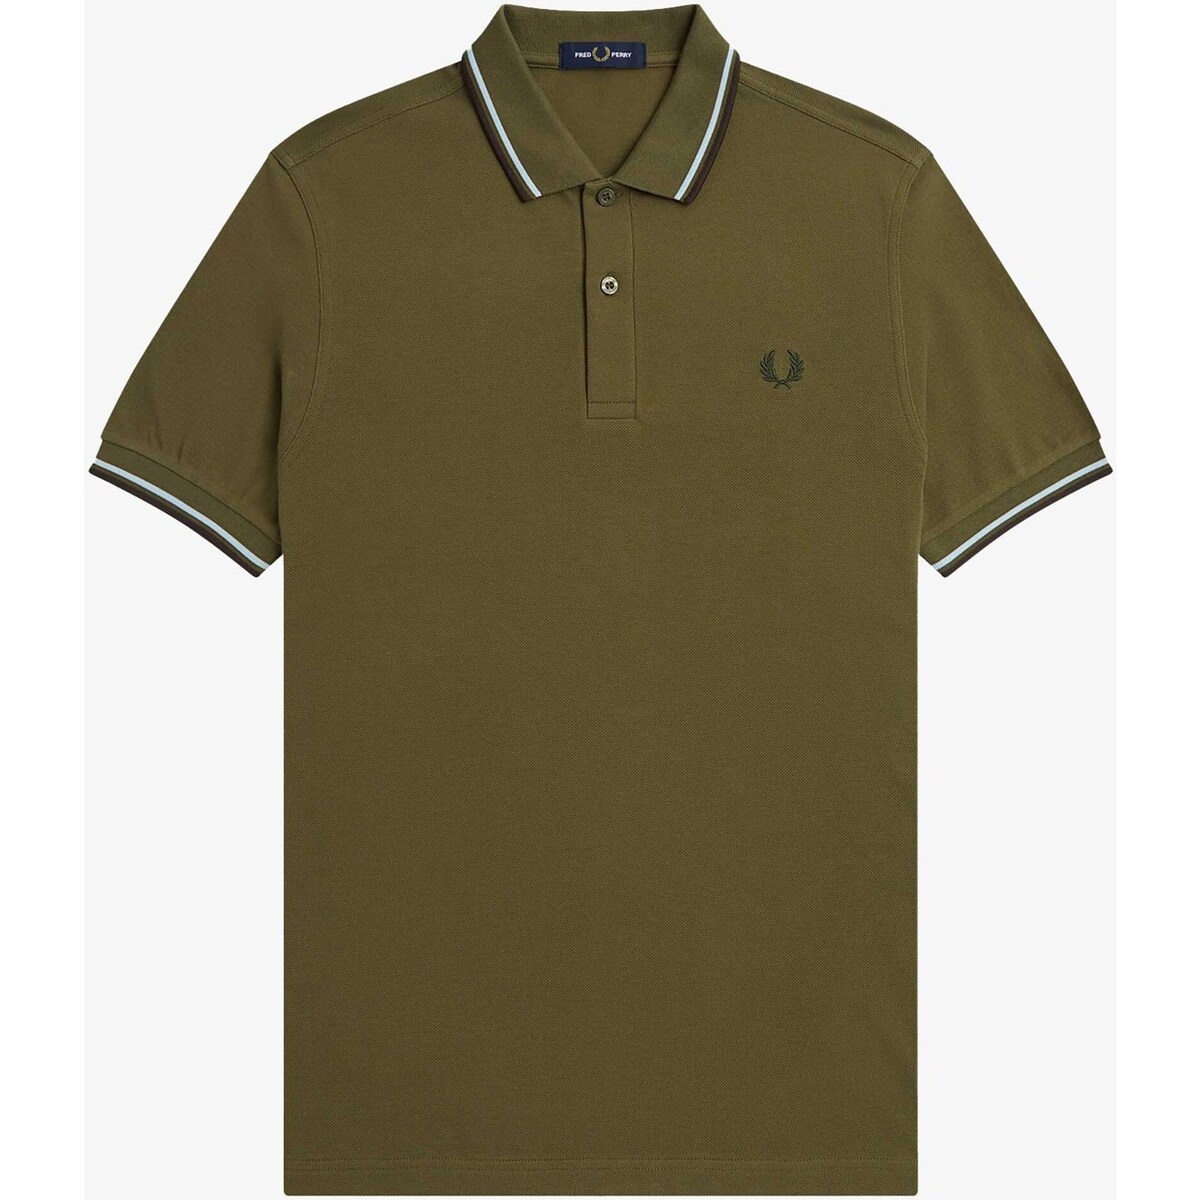 Textiel Heren T-shirts & Polo’s Fred Perry Fp Twin Tipped Shirt Groen